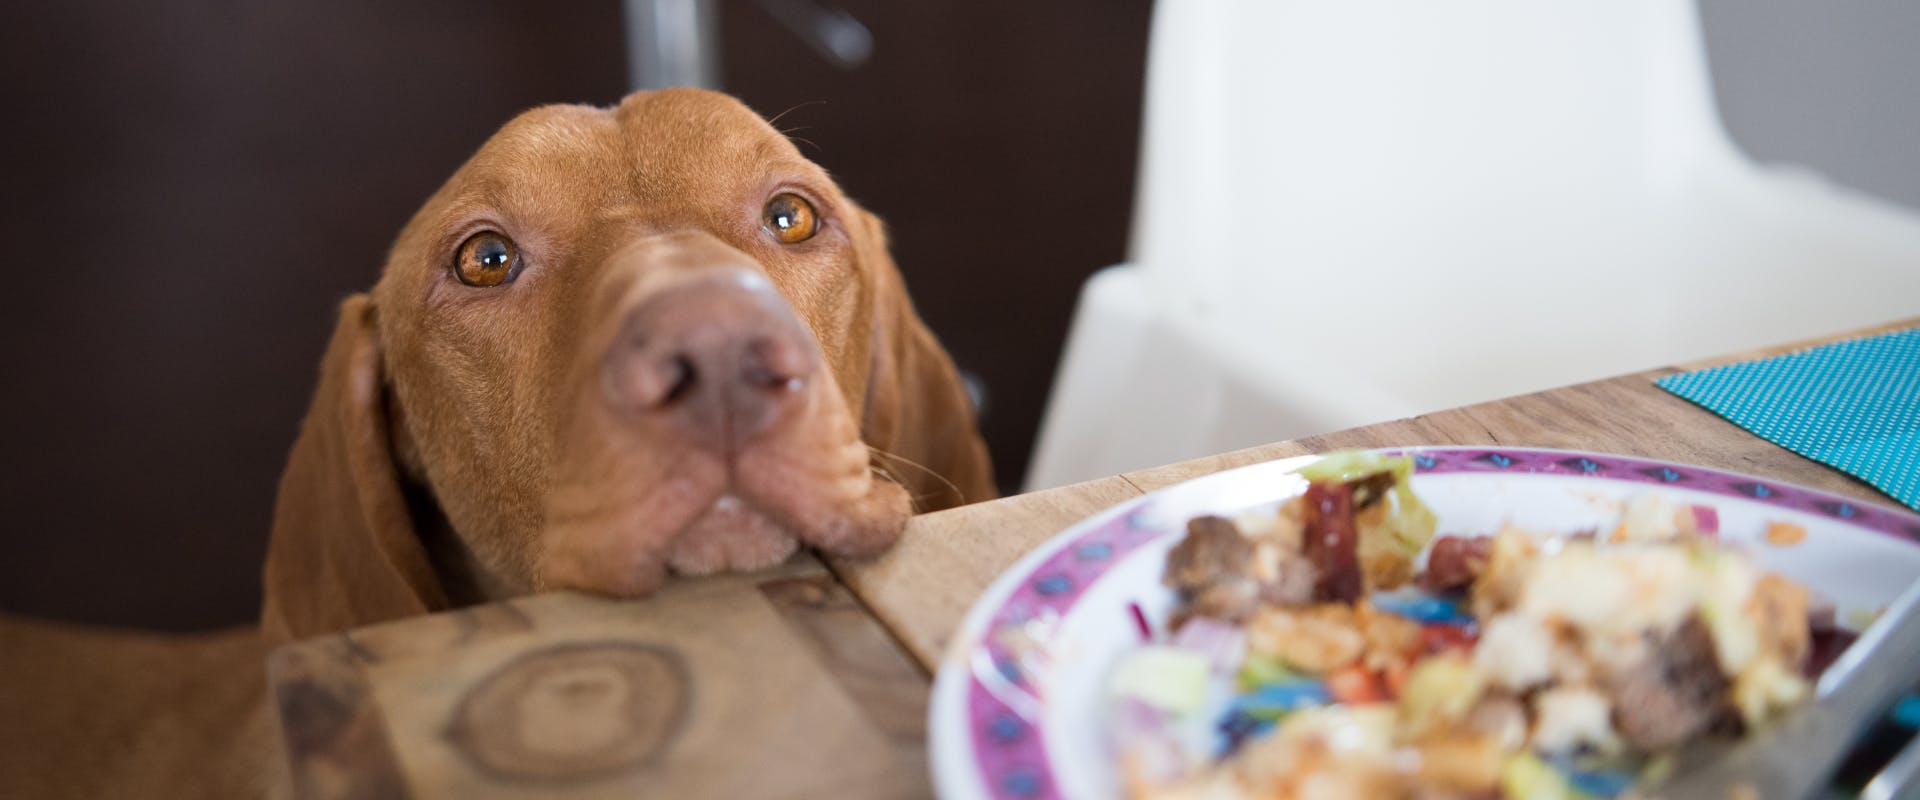 a hound dog resting its head on a dining table looking at a plate of unfinished food